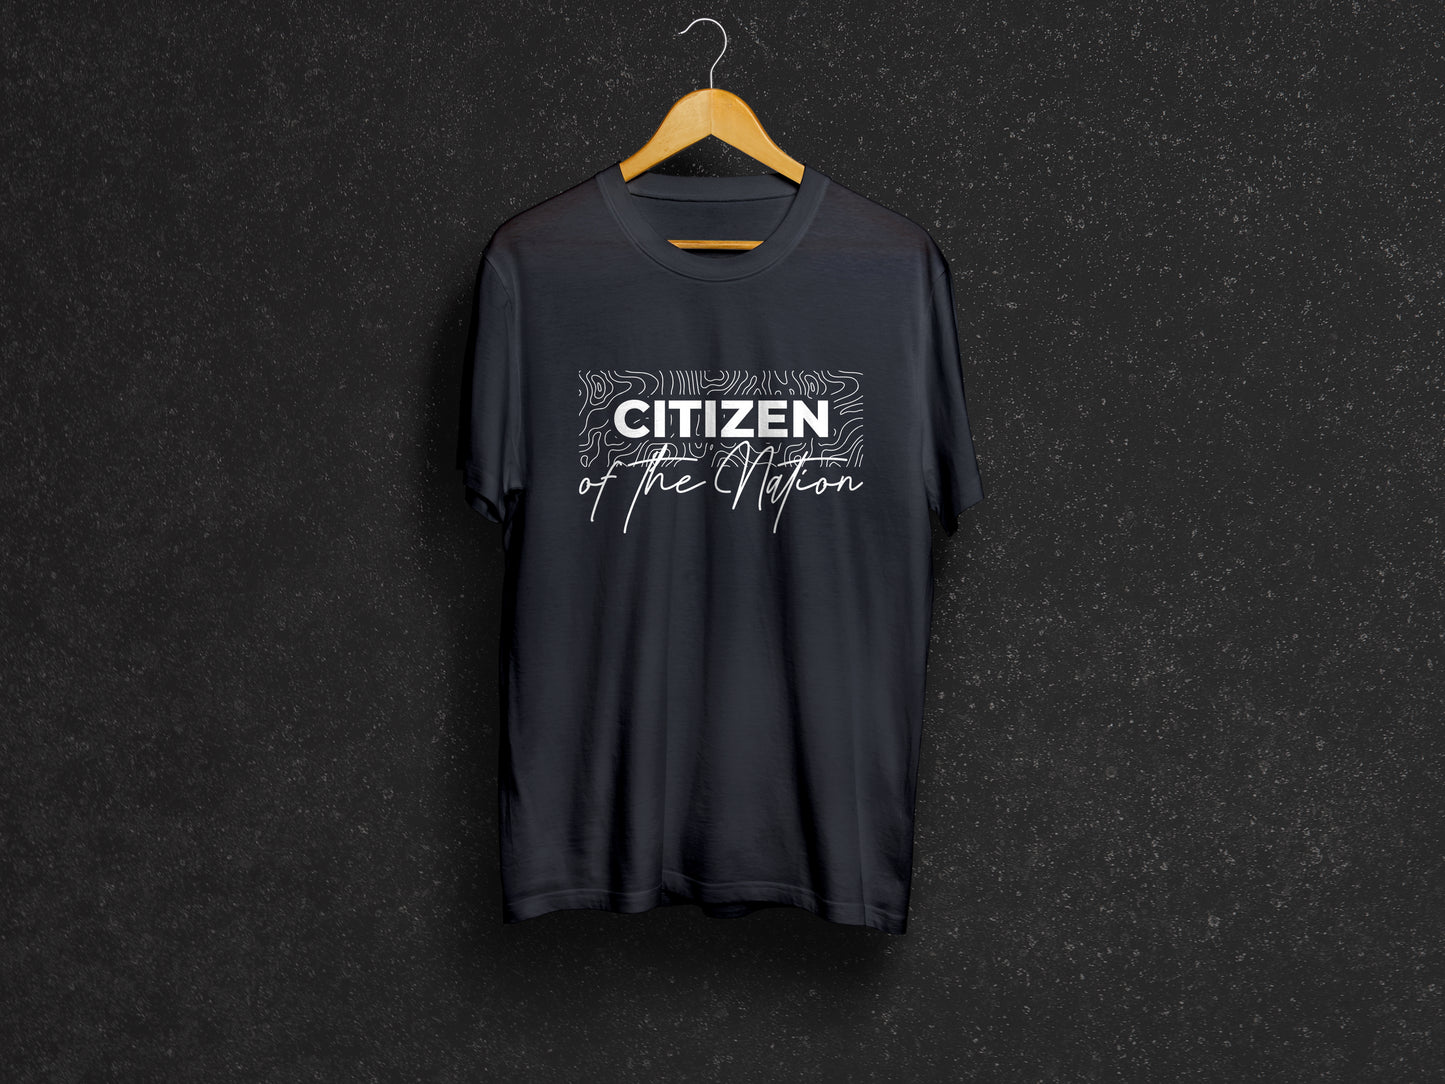 CITIZEN OF THE NATION